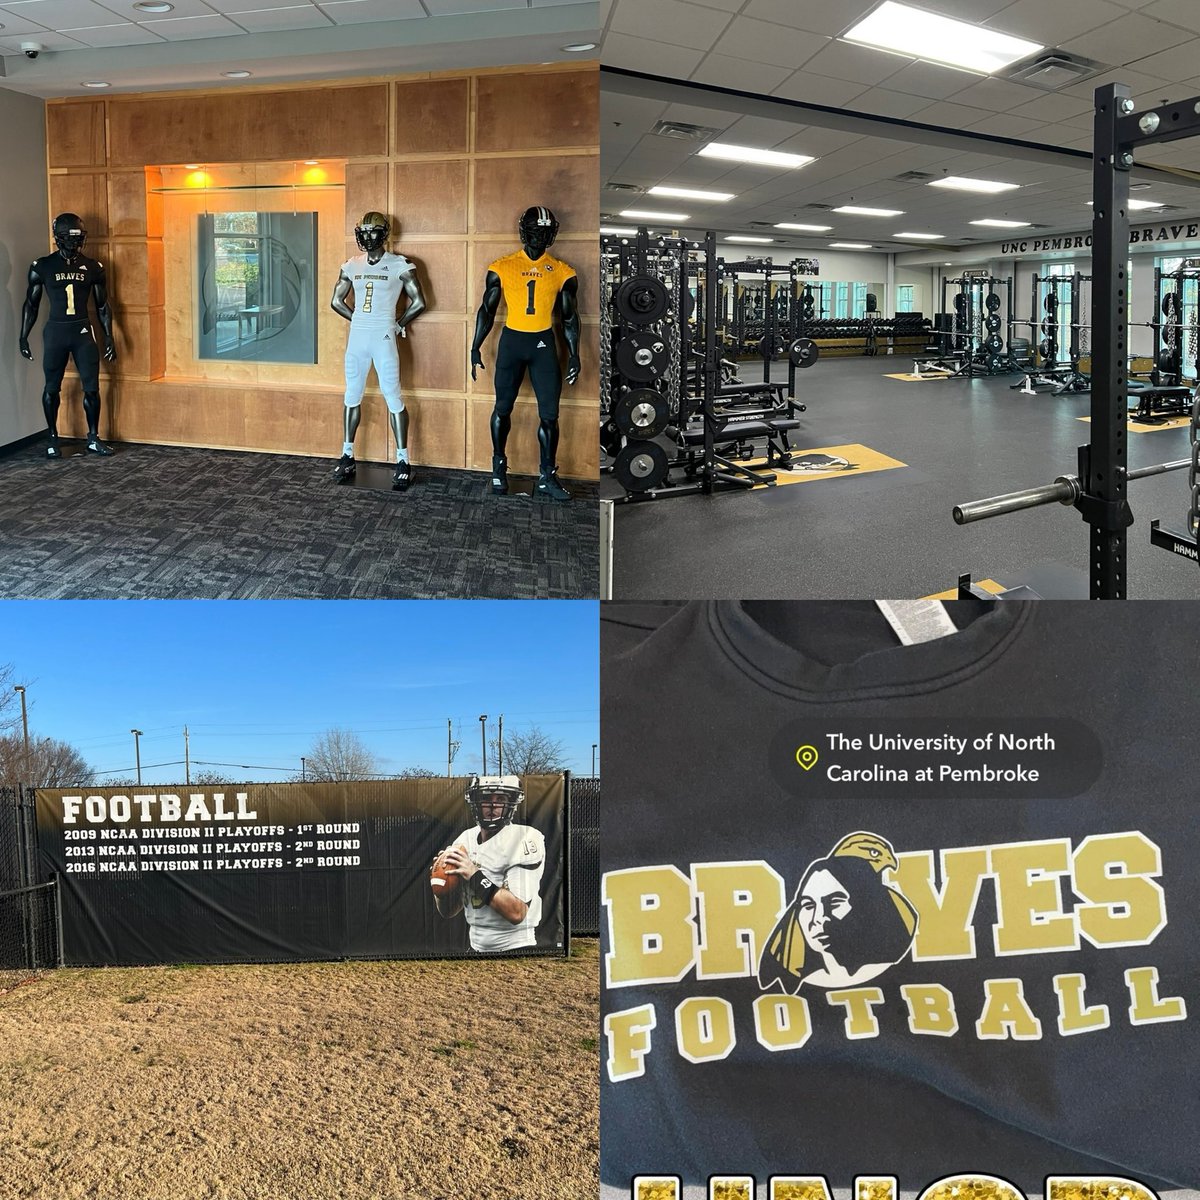 SORRY FOR THE WAIT BUT IT IS OFFICIAL I HAVE ACCEPTED THE CORNERBACK COACH POSITION AT THE UNIVERSITY OF NORTH CAROLINA PEMBROKE! @UNCP_Football THANK YOU TO @CoachHallUNCP @Coach_Neely FOR THE OPPORTUNITY! READY TO GET IT #OUTDAMUD AND #BELEGENDARY LETS GO #BRAVESNATION